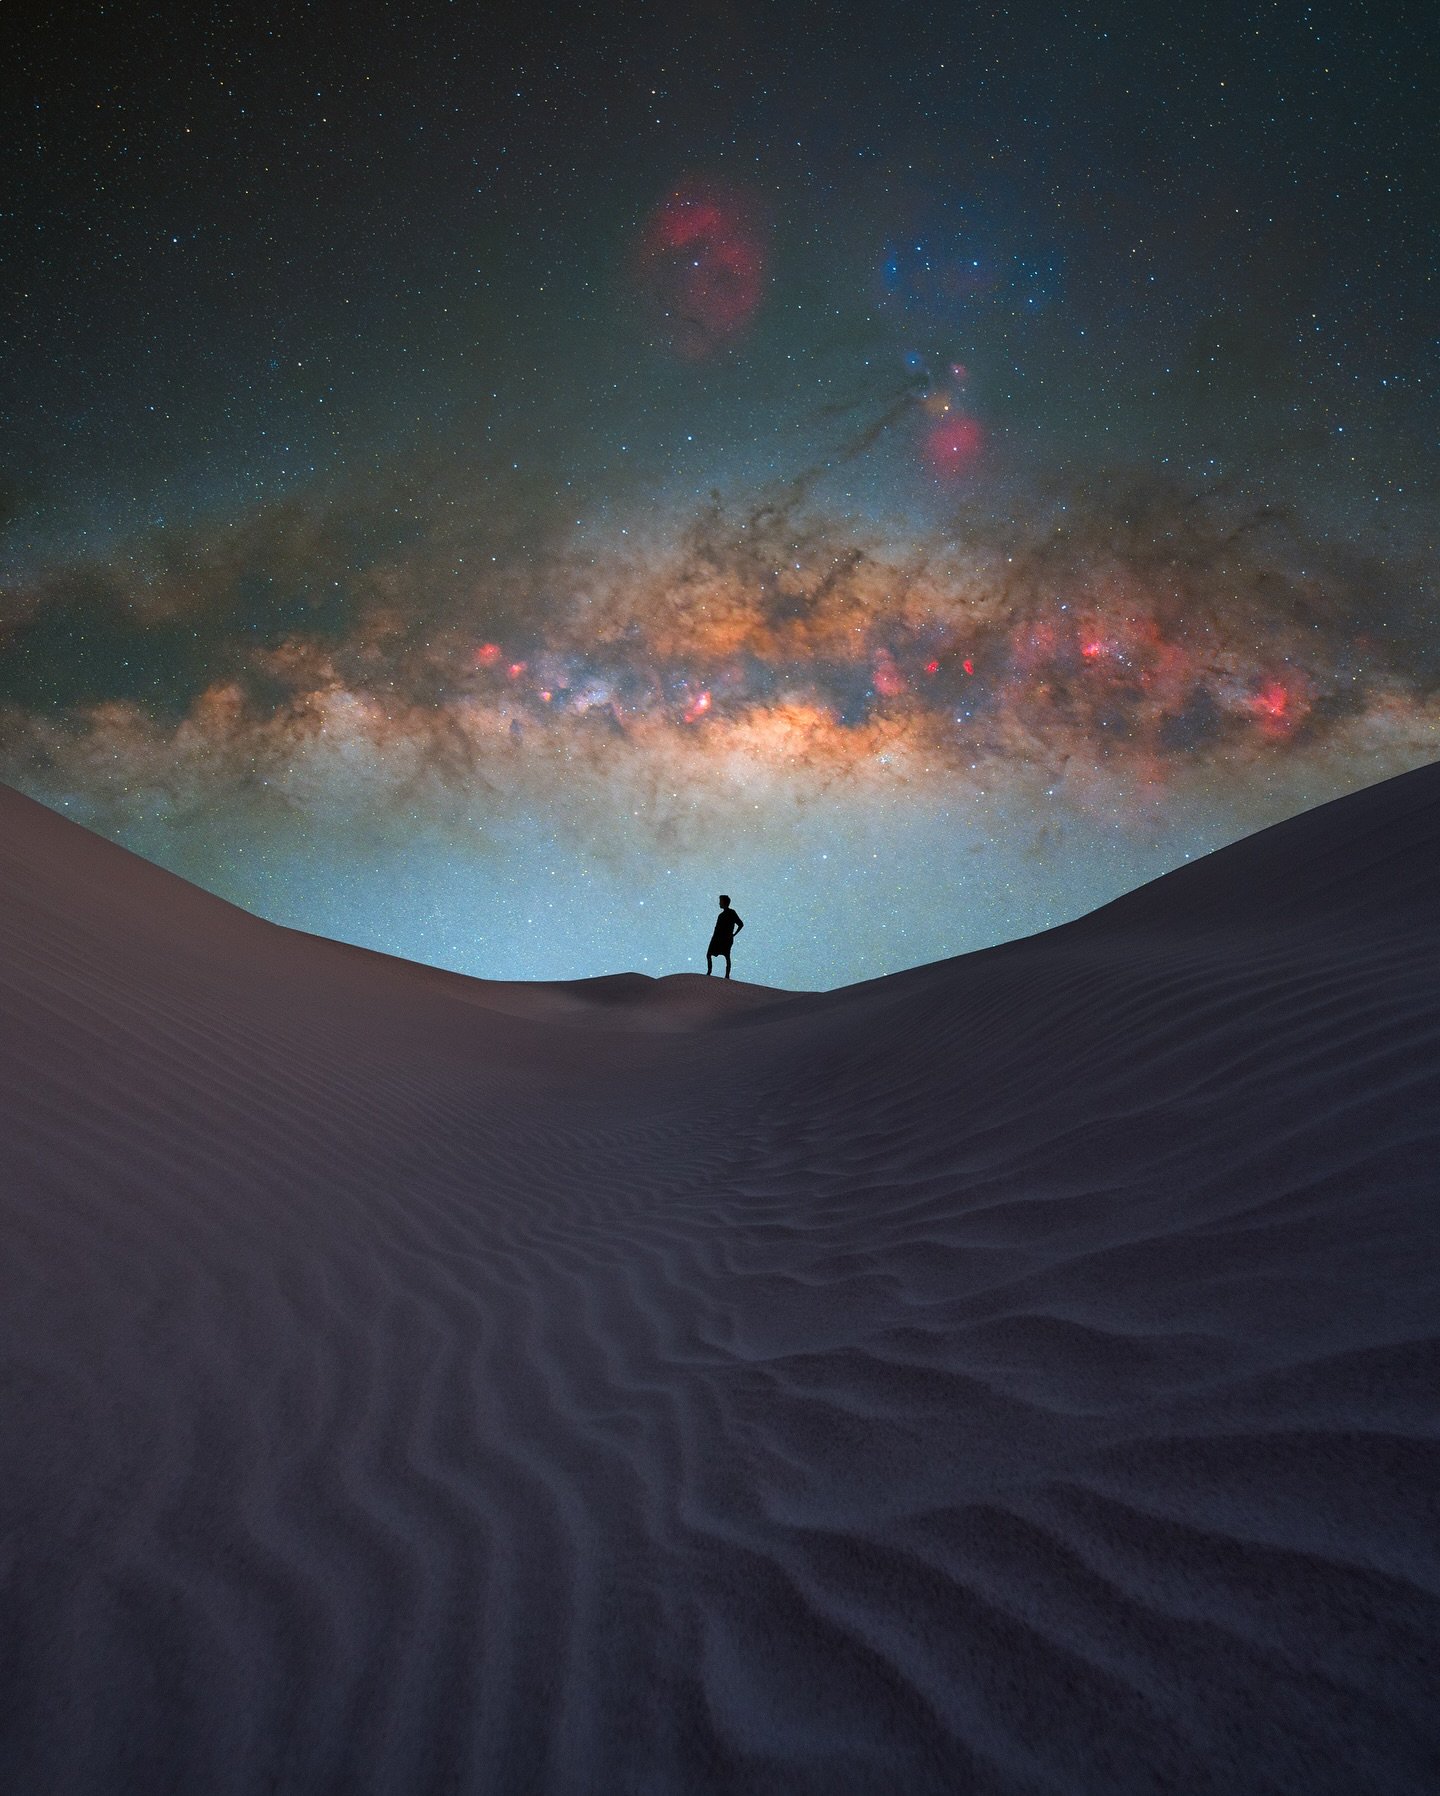 Arher Sand Dunes 

I captured this image of @bkuhlphoto on top of the sand dunes in Socotra at Arher on our last expedition there! 

I used my Nebula Booster filter for this shot to pull out the ha Alpha details, for more info on the filter send me a